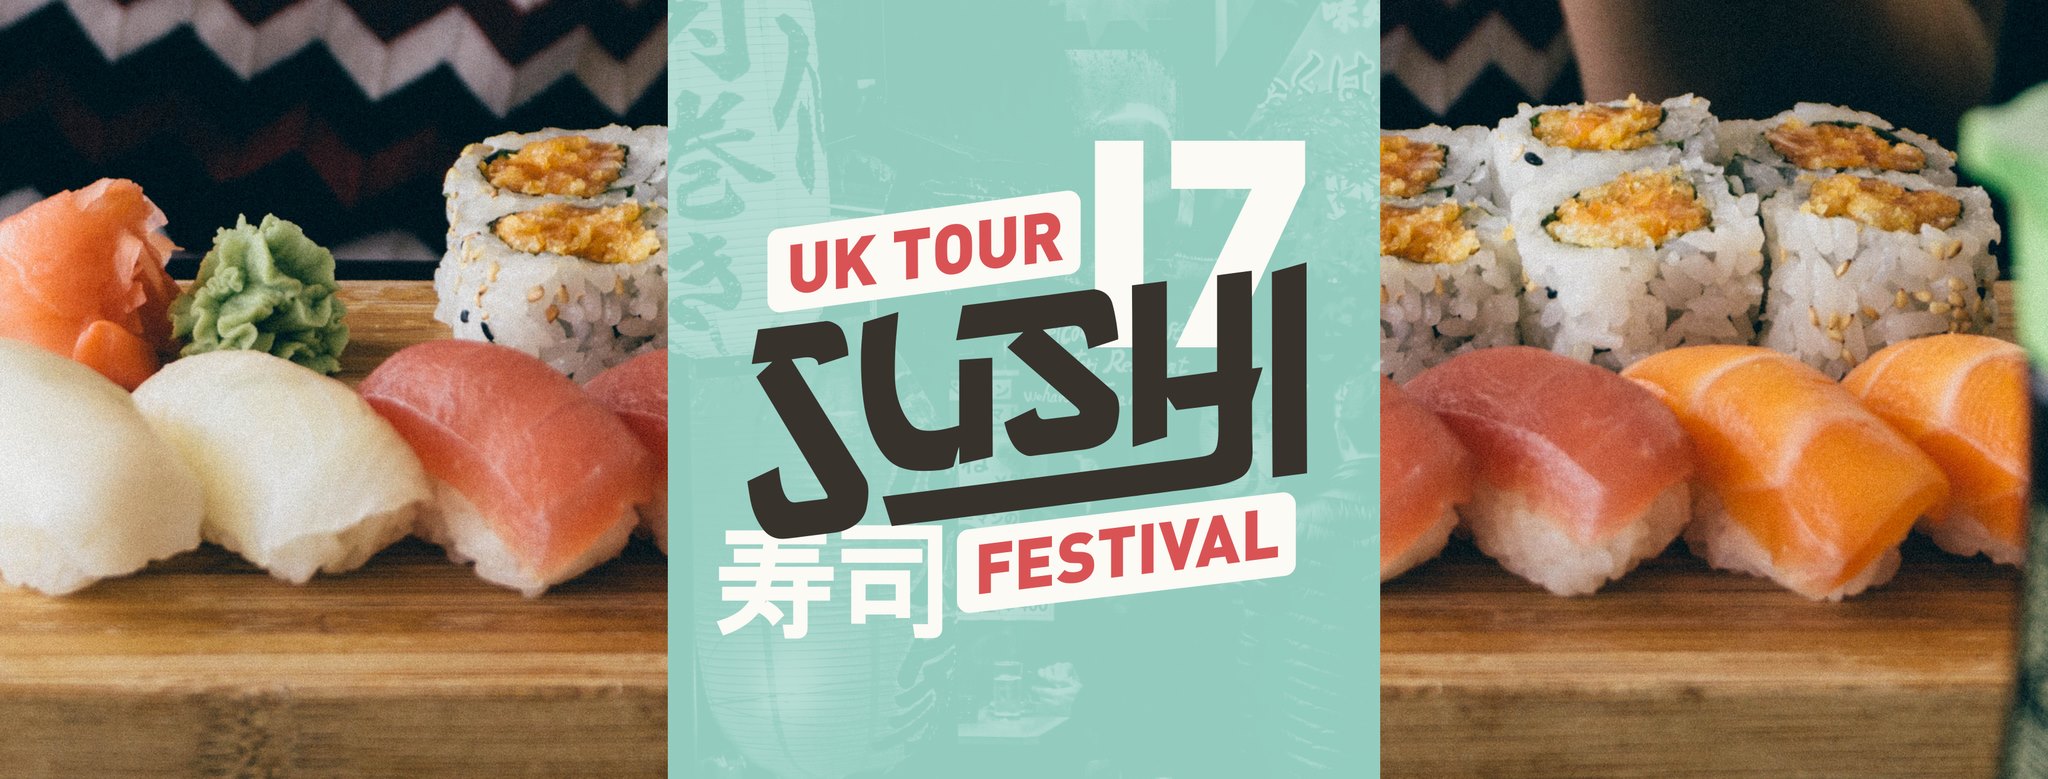 Sushi Festival UK Tour Event information and Tickets